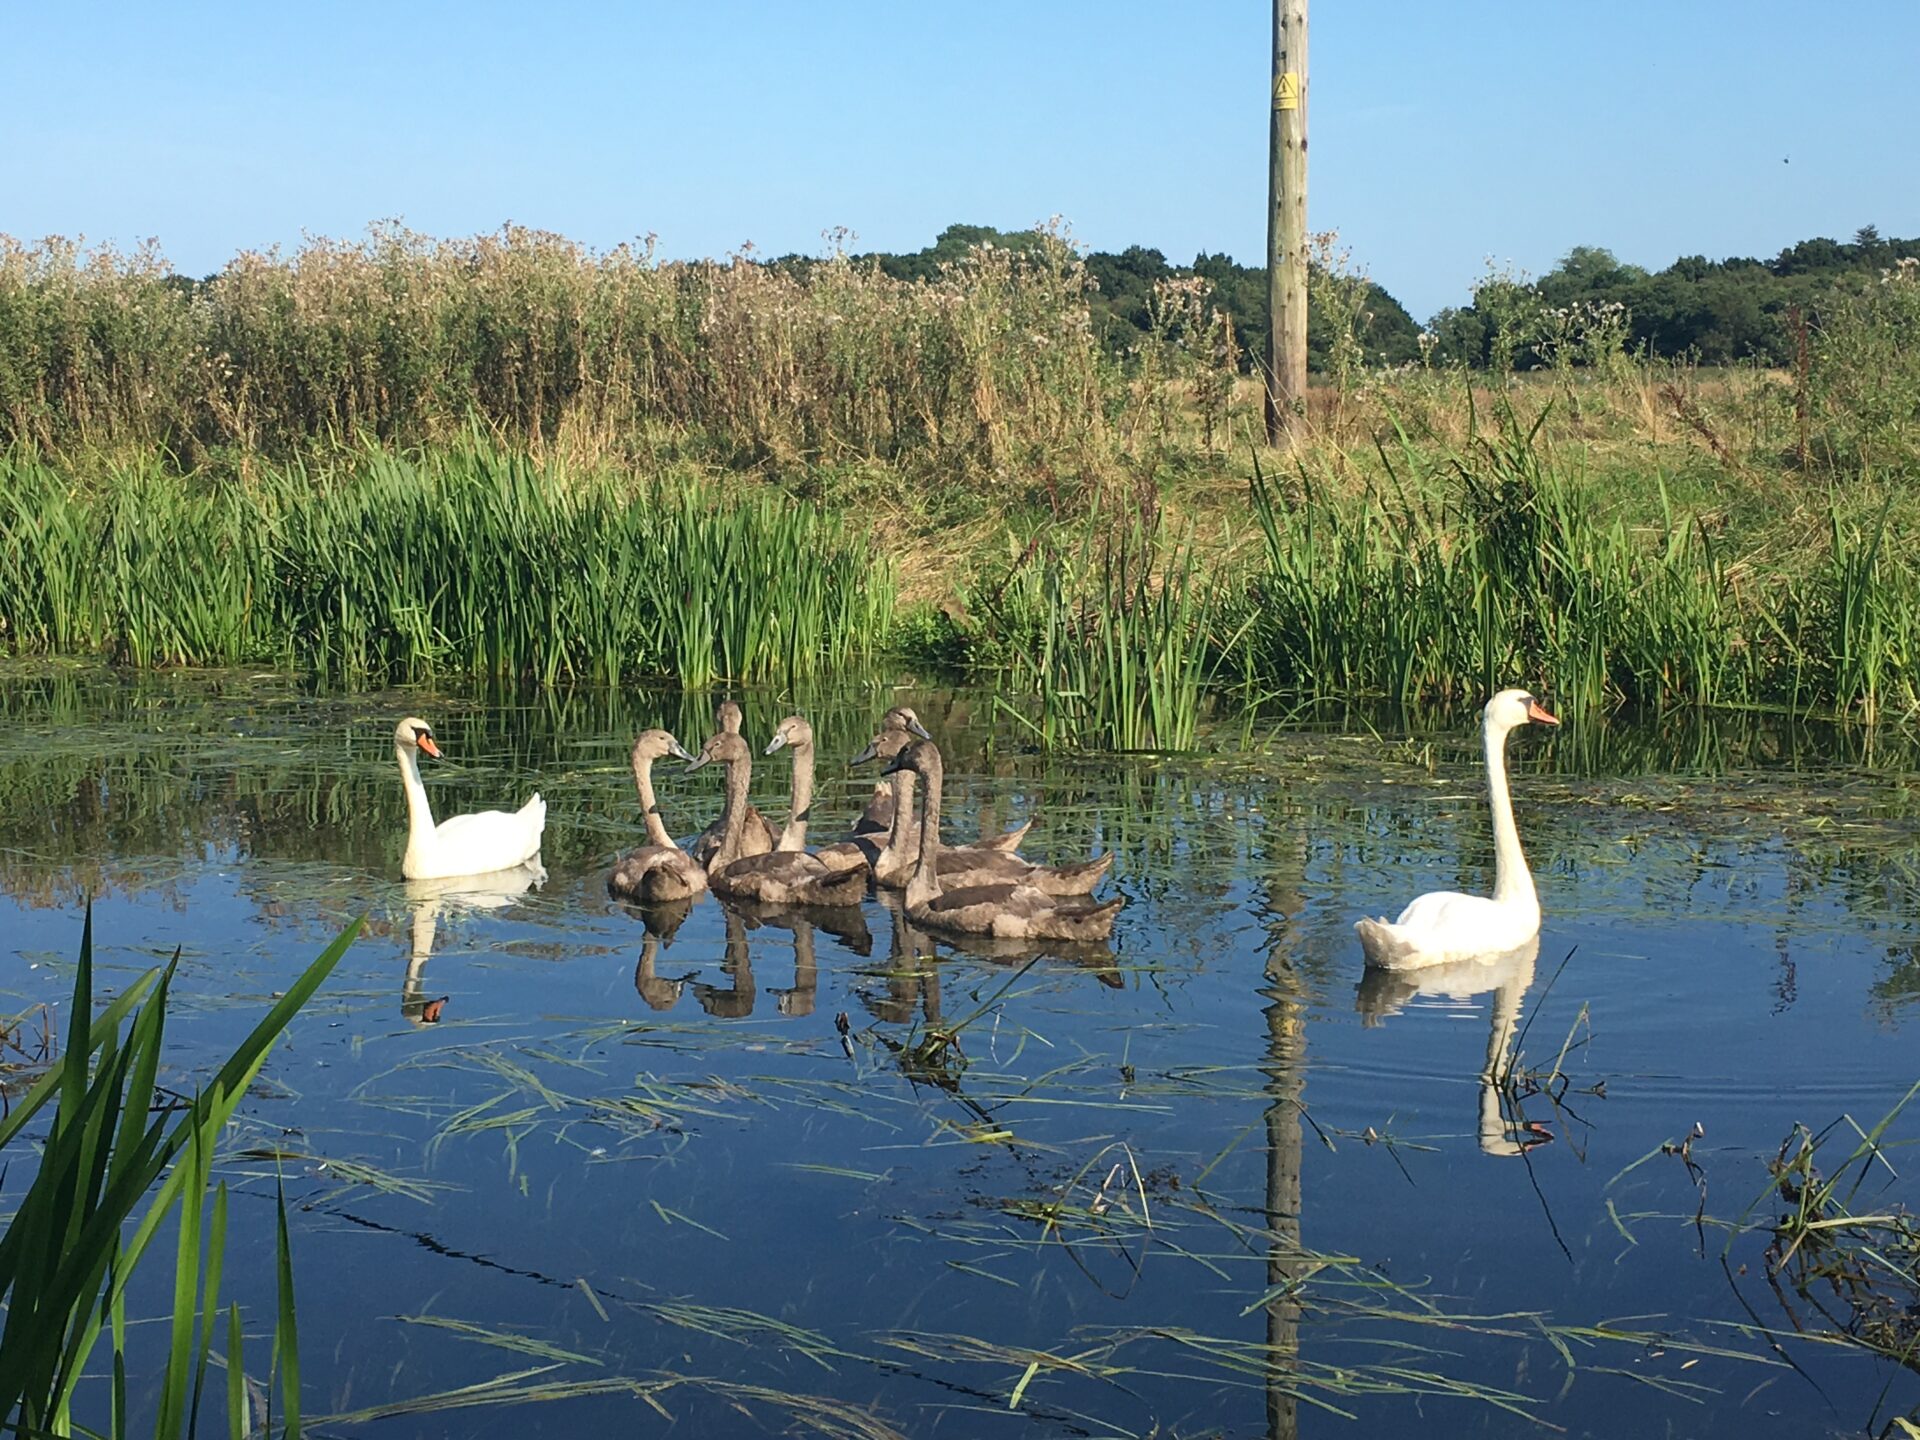 Dilham Hall Retreats swans on the private canal running through dilham hall retreats  couples norfolk broads dilham hall retreats luxury canoe hire nature 